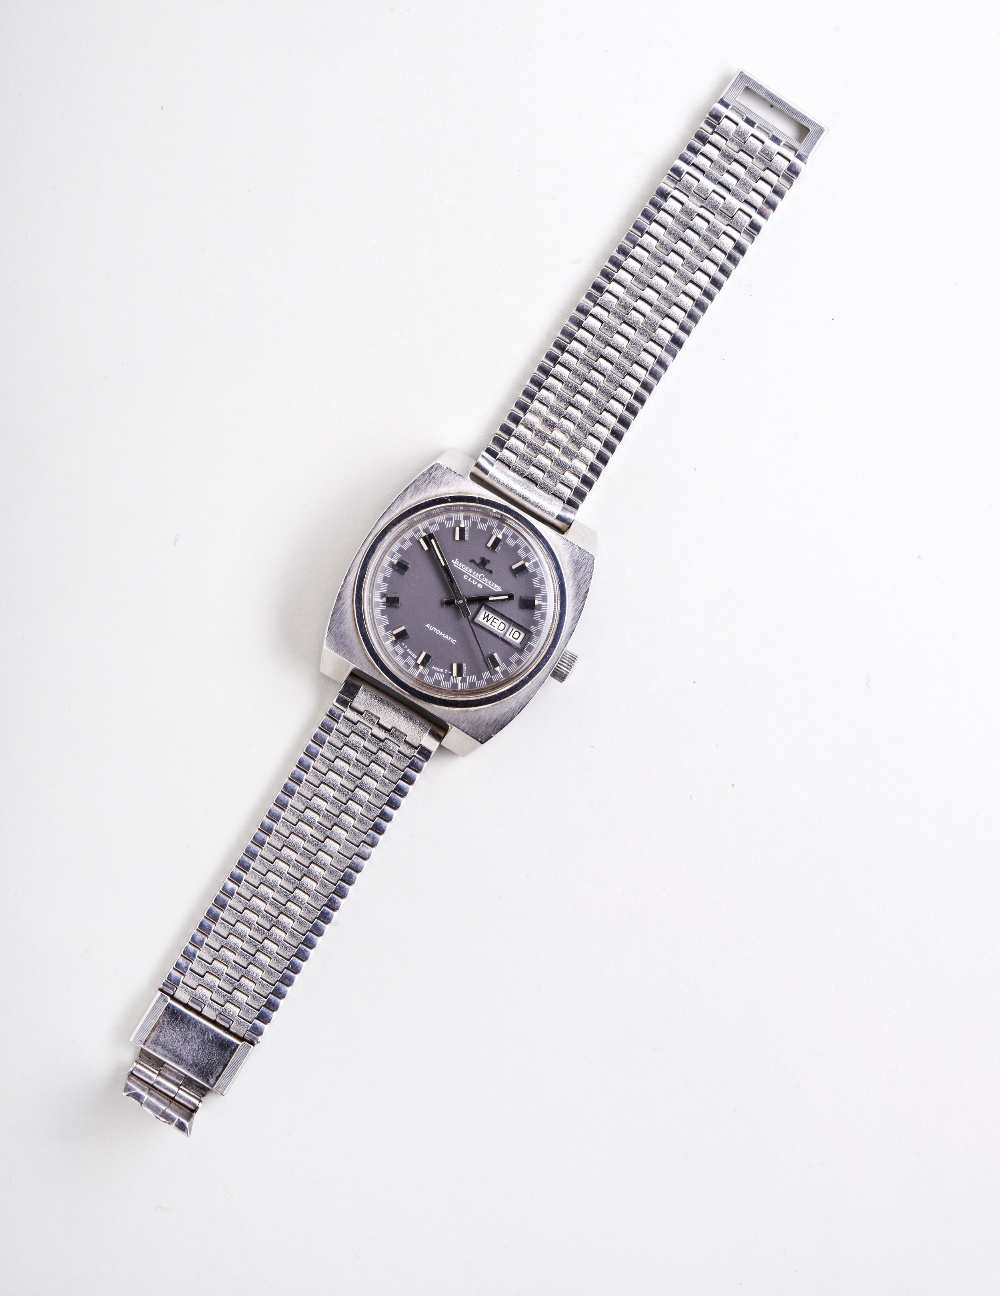 JAEGER-LECOULTRE STAINLESS STEEL CLUB DAY/DATE LATE 1960S AUTOMATIC WRISTWATCH, with broad baton - Image 2 of 3